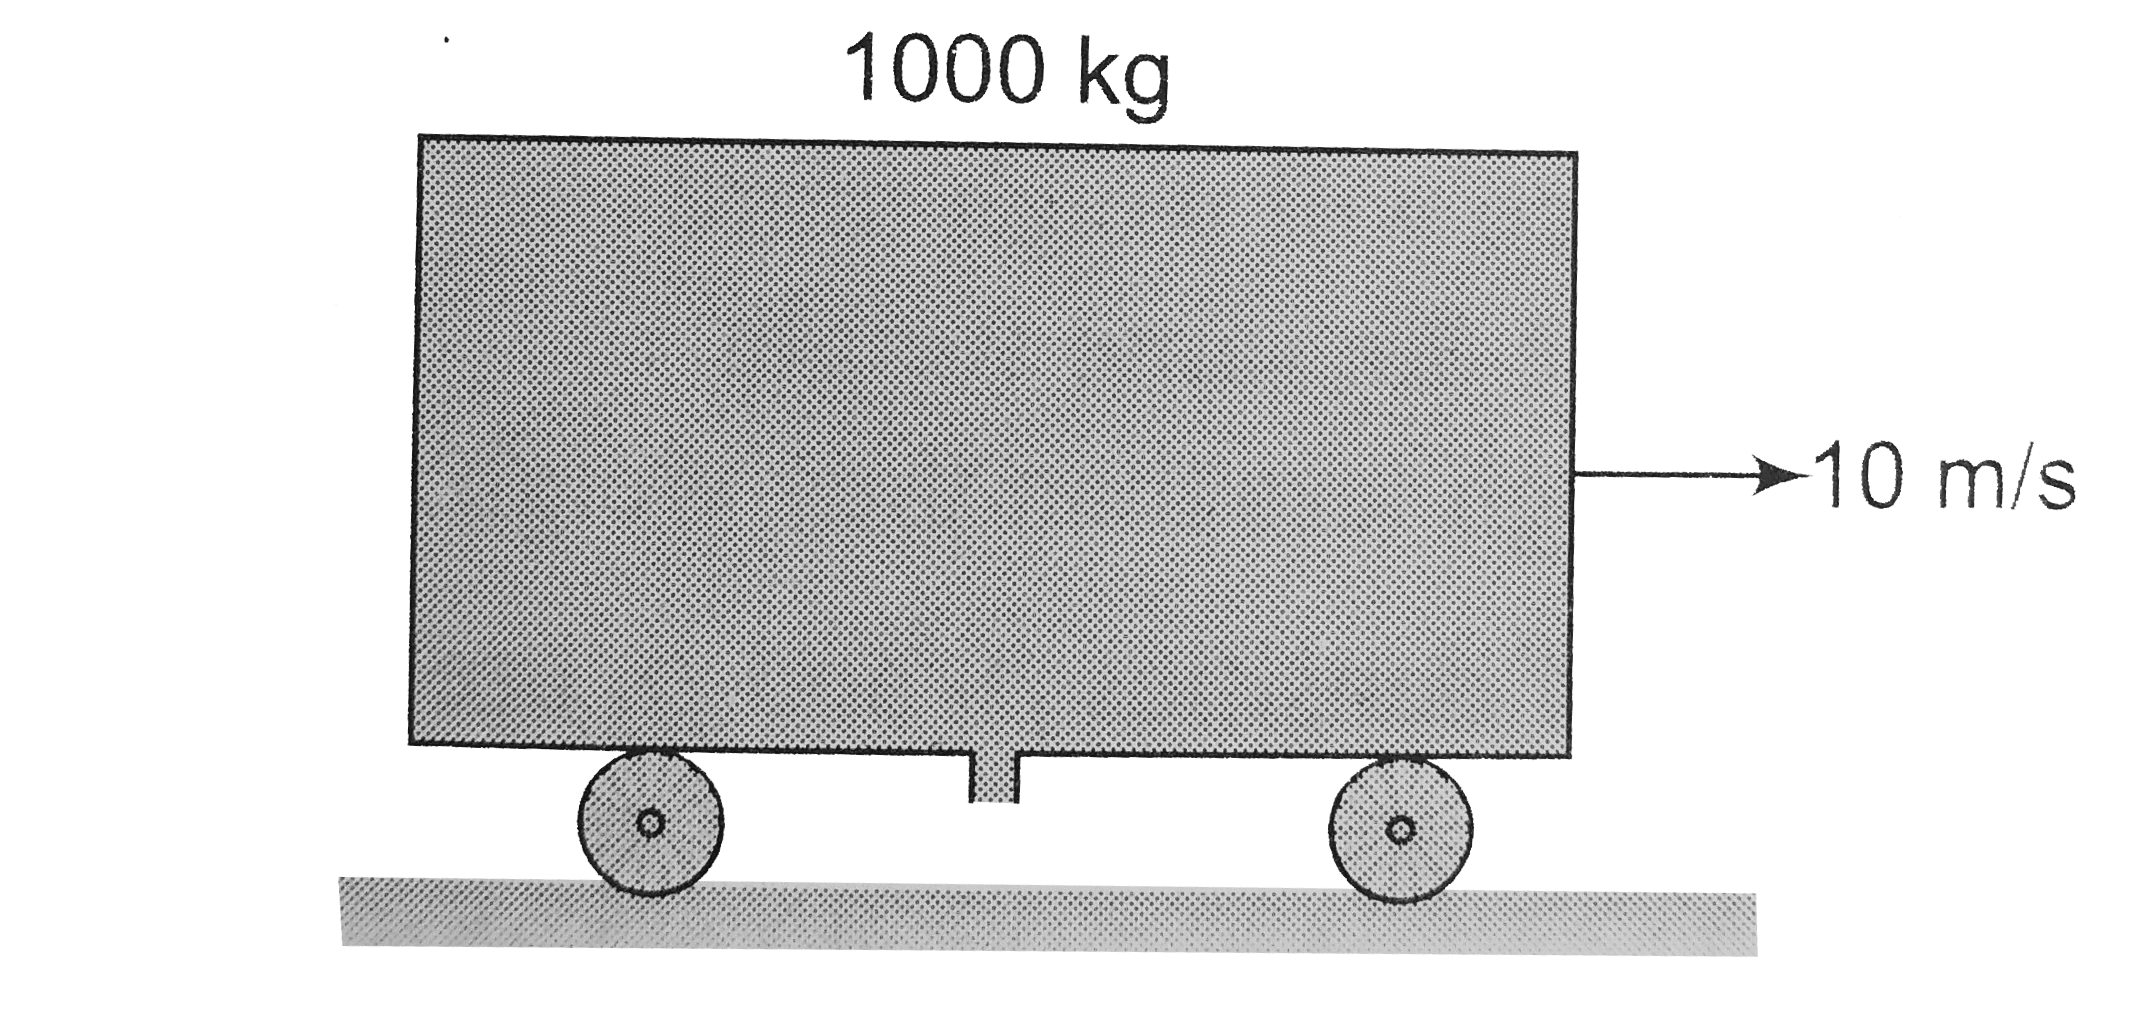 A trolley containing water has total mass 1000 kg. Now water starts coming out of the trolley at the rate of 10 kg//s from below it. Find the velocity of the trolley after 50 sec, If the initial speed is 10 m//s on the horizontal frictionless road.